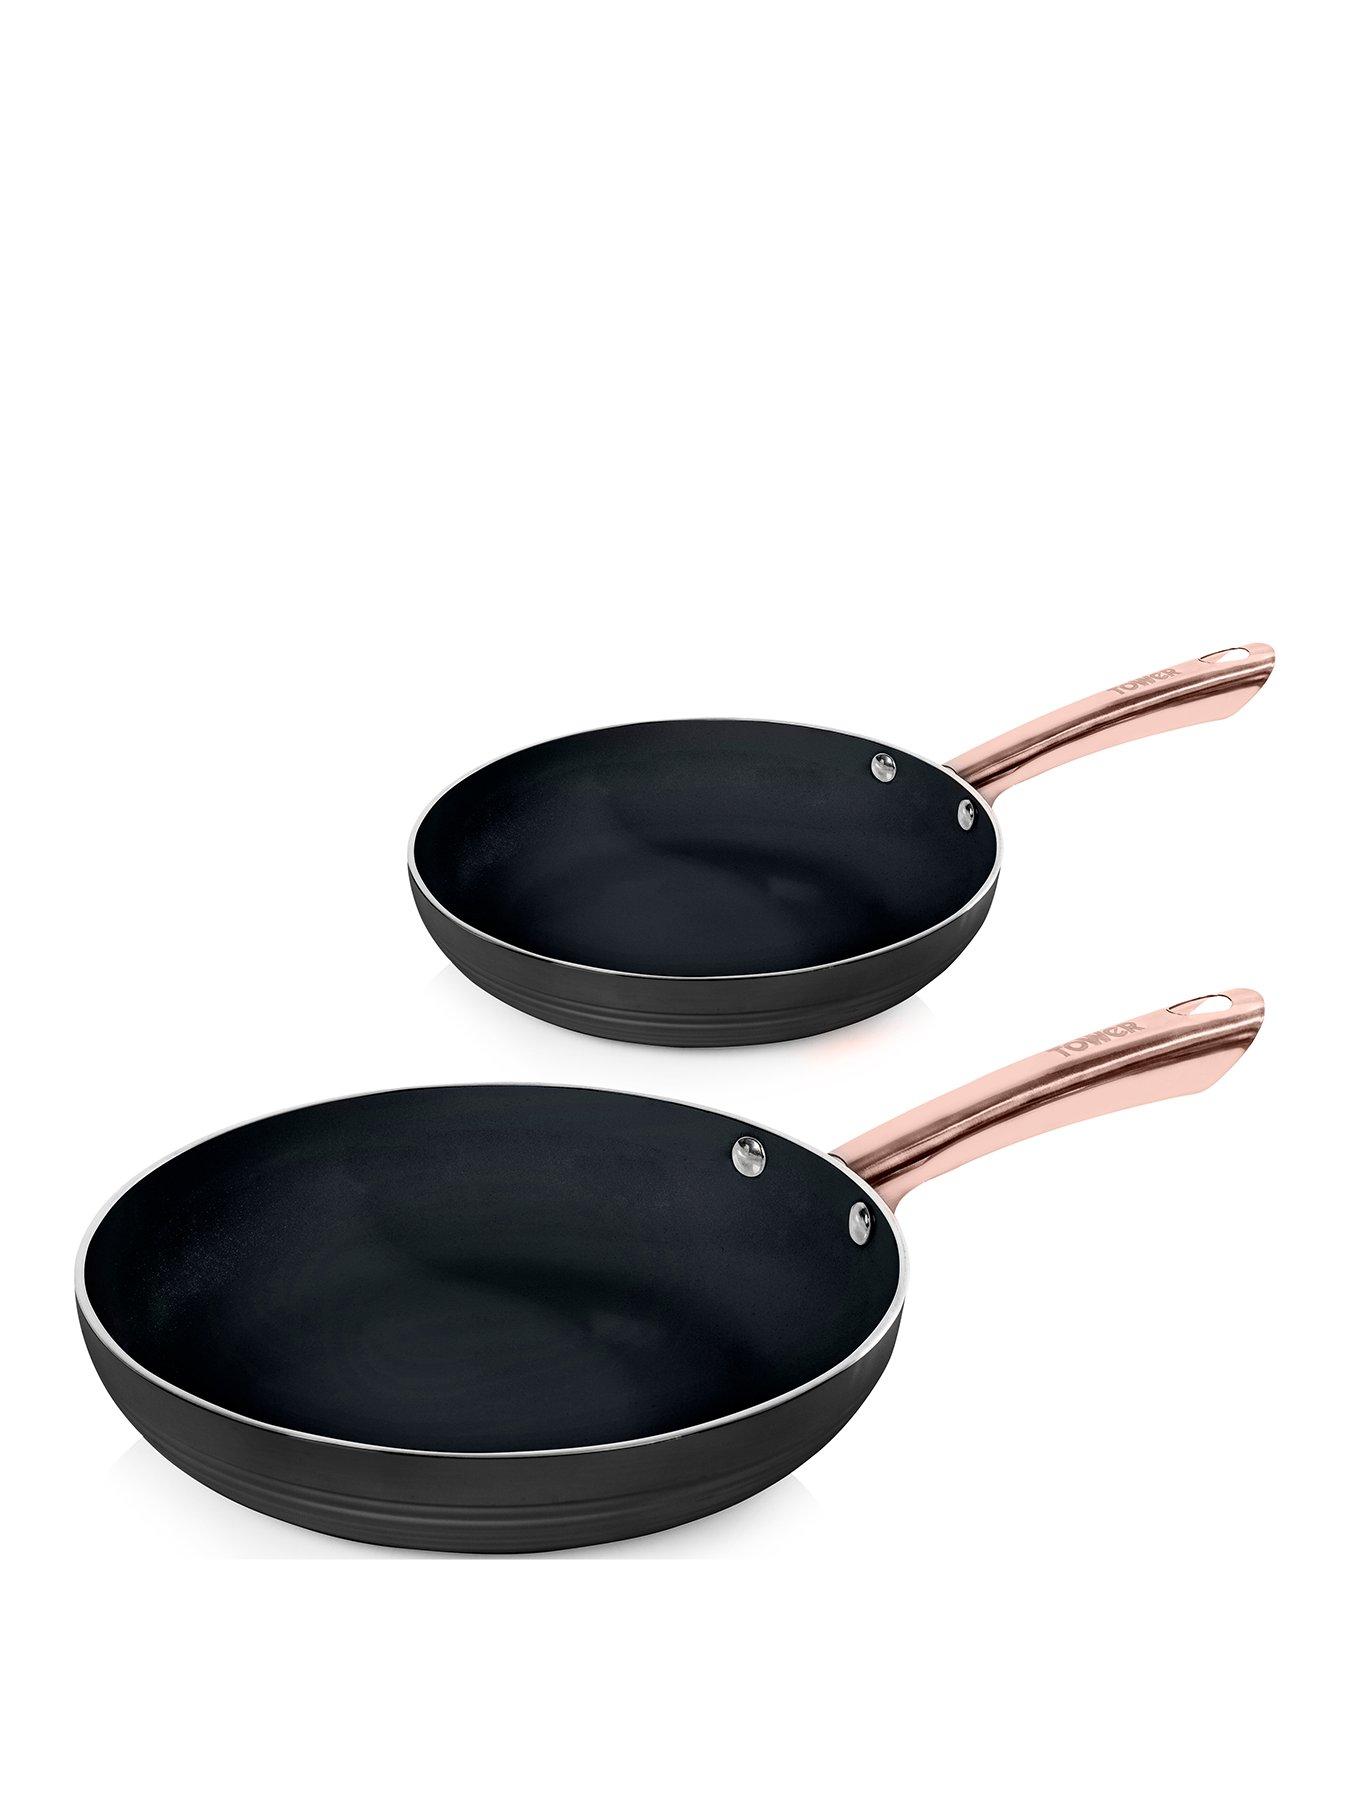 Copper frying pan for risotto 28 cm with auxiliary handle + insert